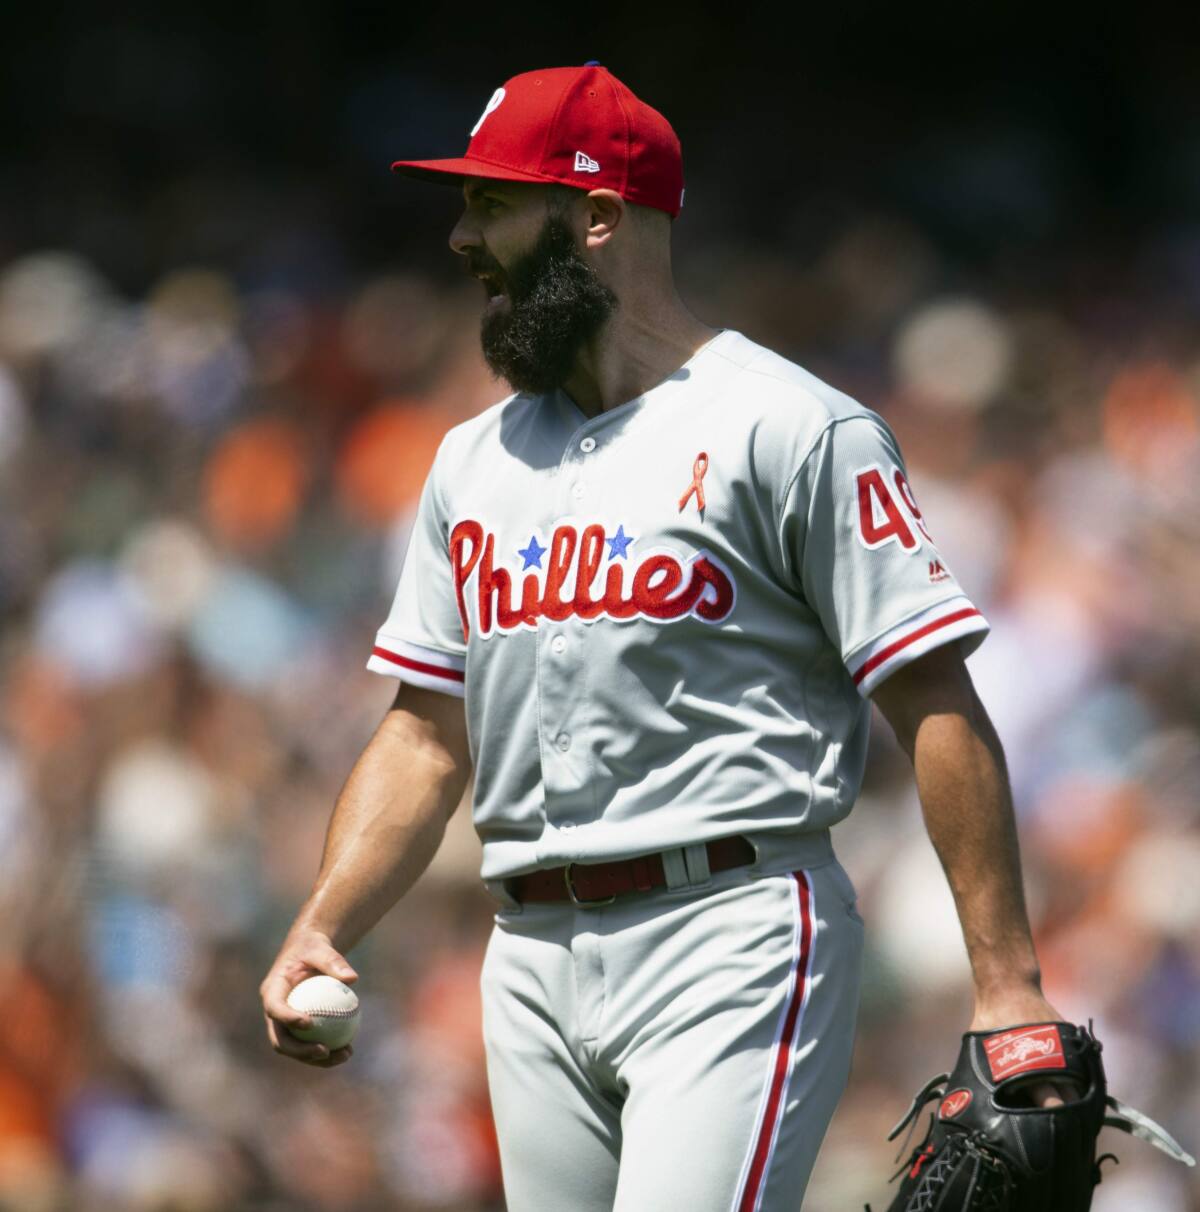 Jake Arrieta Contract With Phillies is Among the Worst of MLB Starting  Pitchers